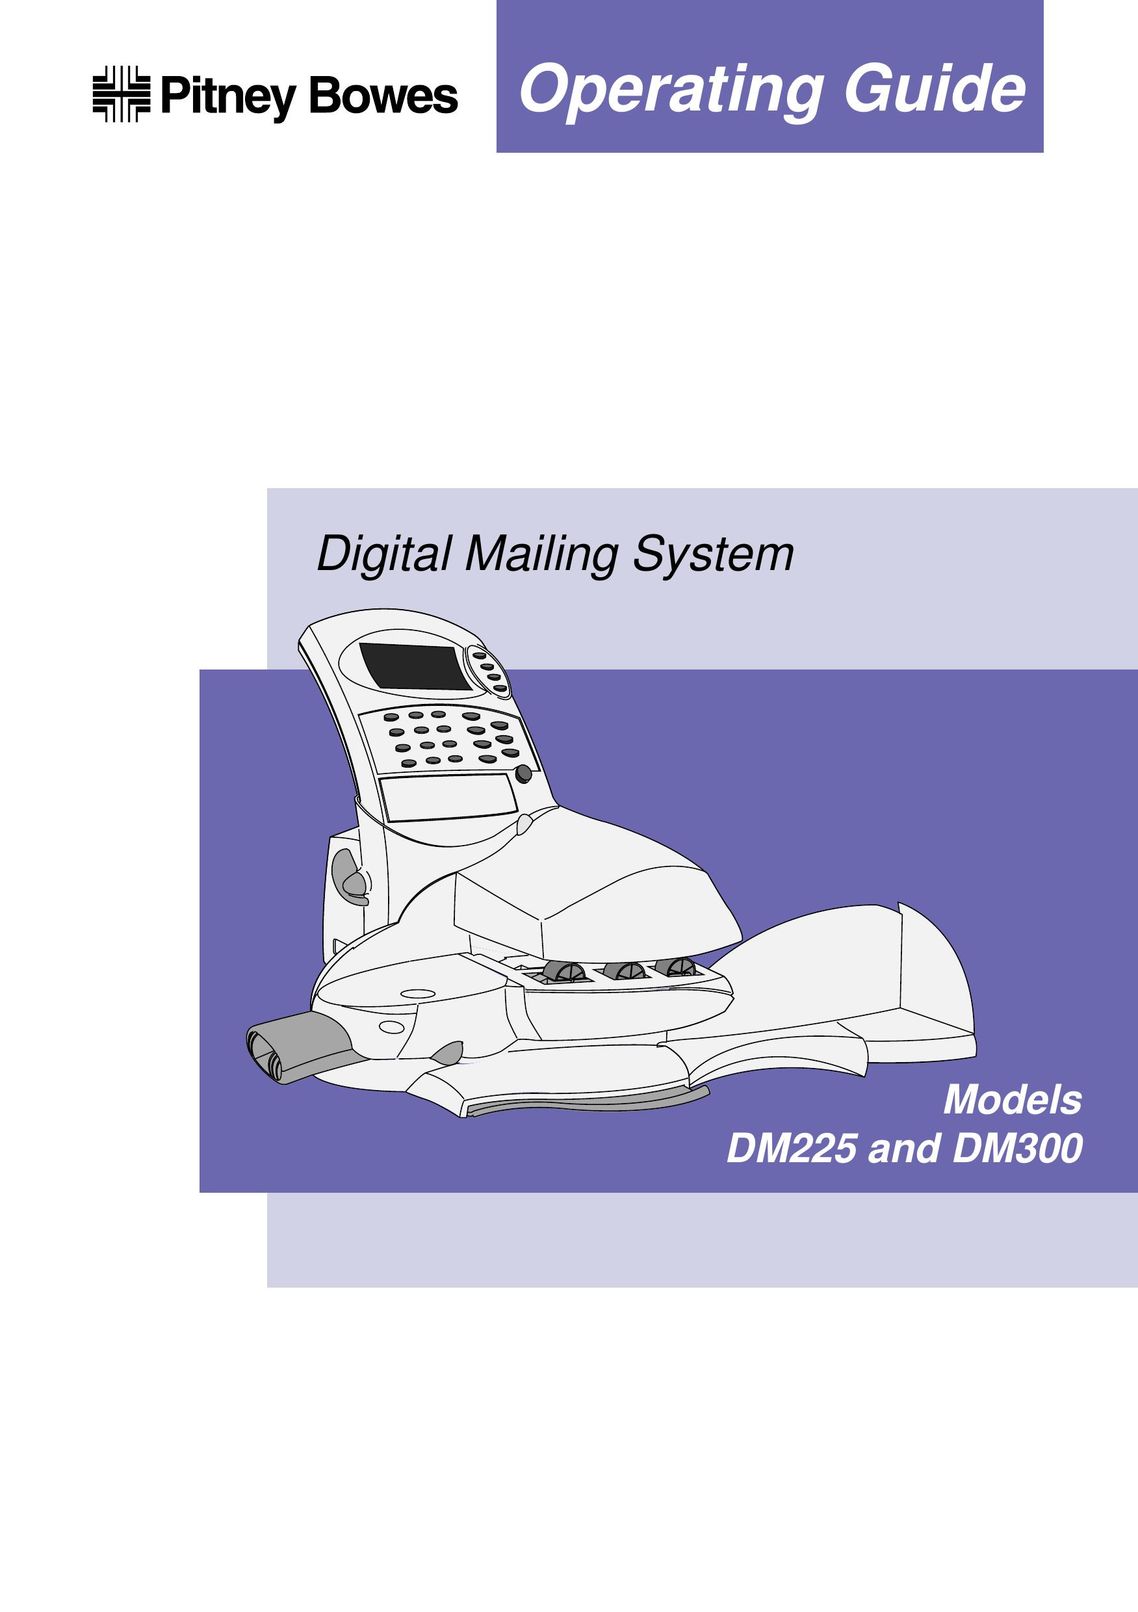 Pitney Bowes DM225 All in One Printer User Manual